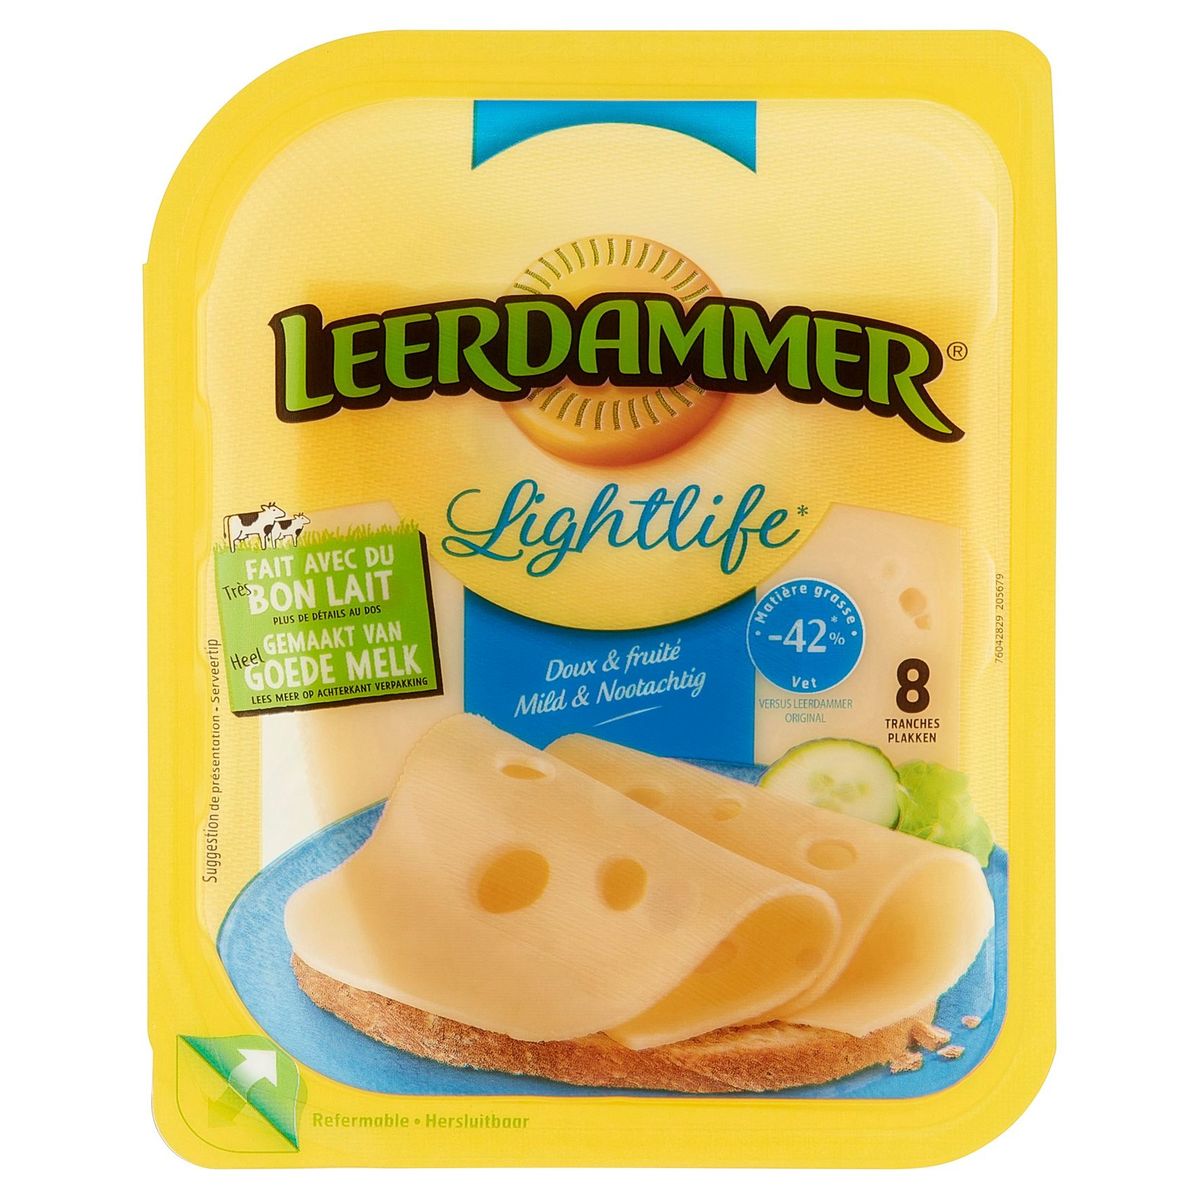 Leerdammer Lightlife 8 Tranches 180 g | Carrefour Site